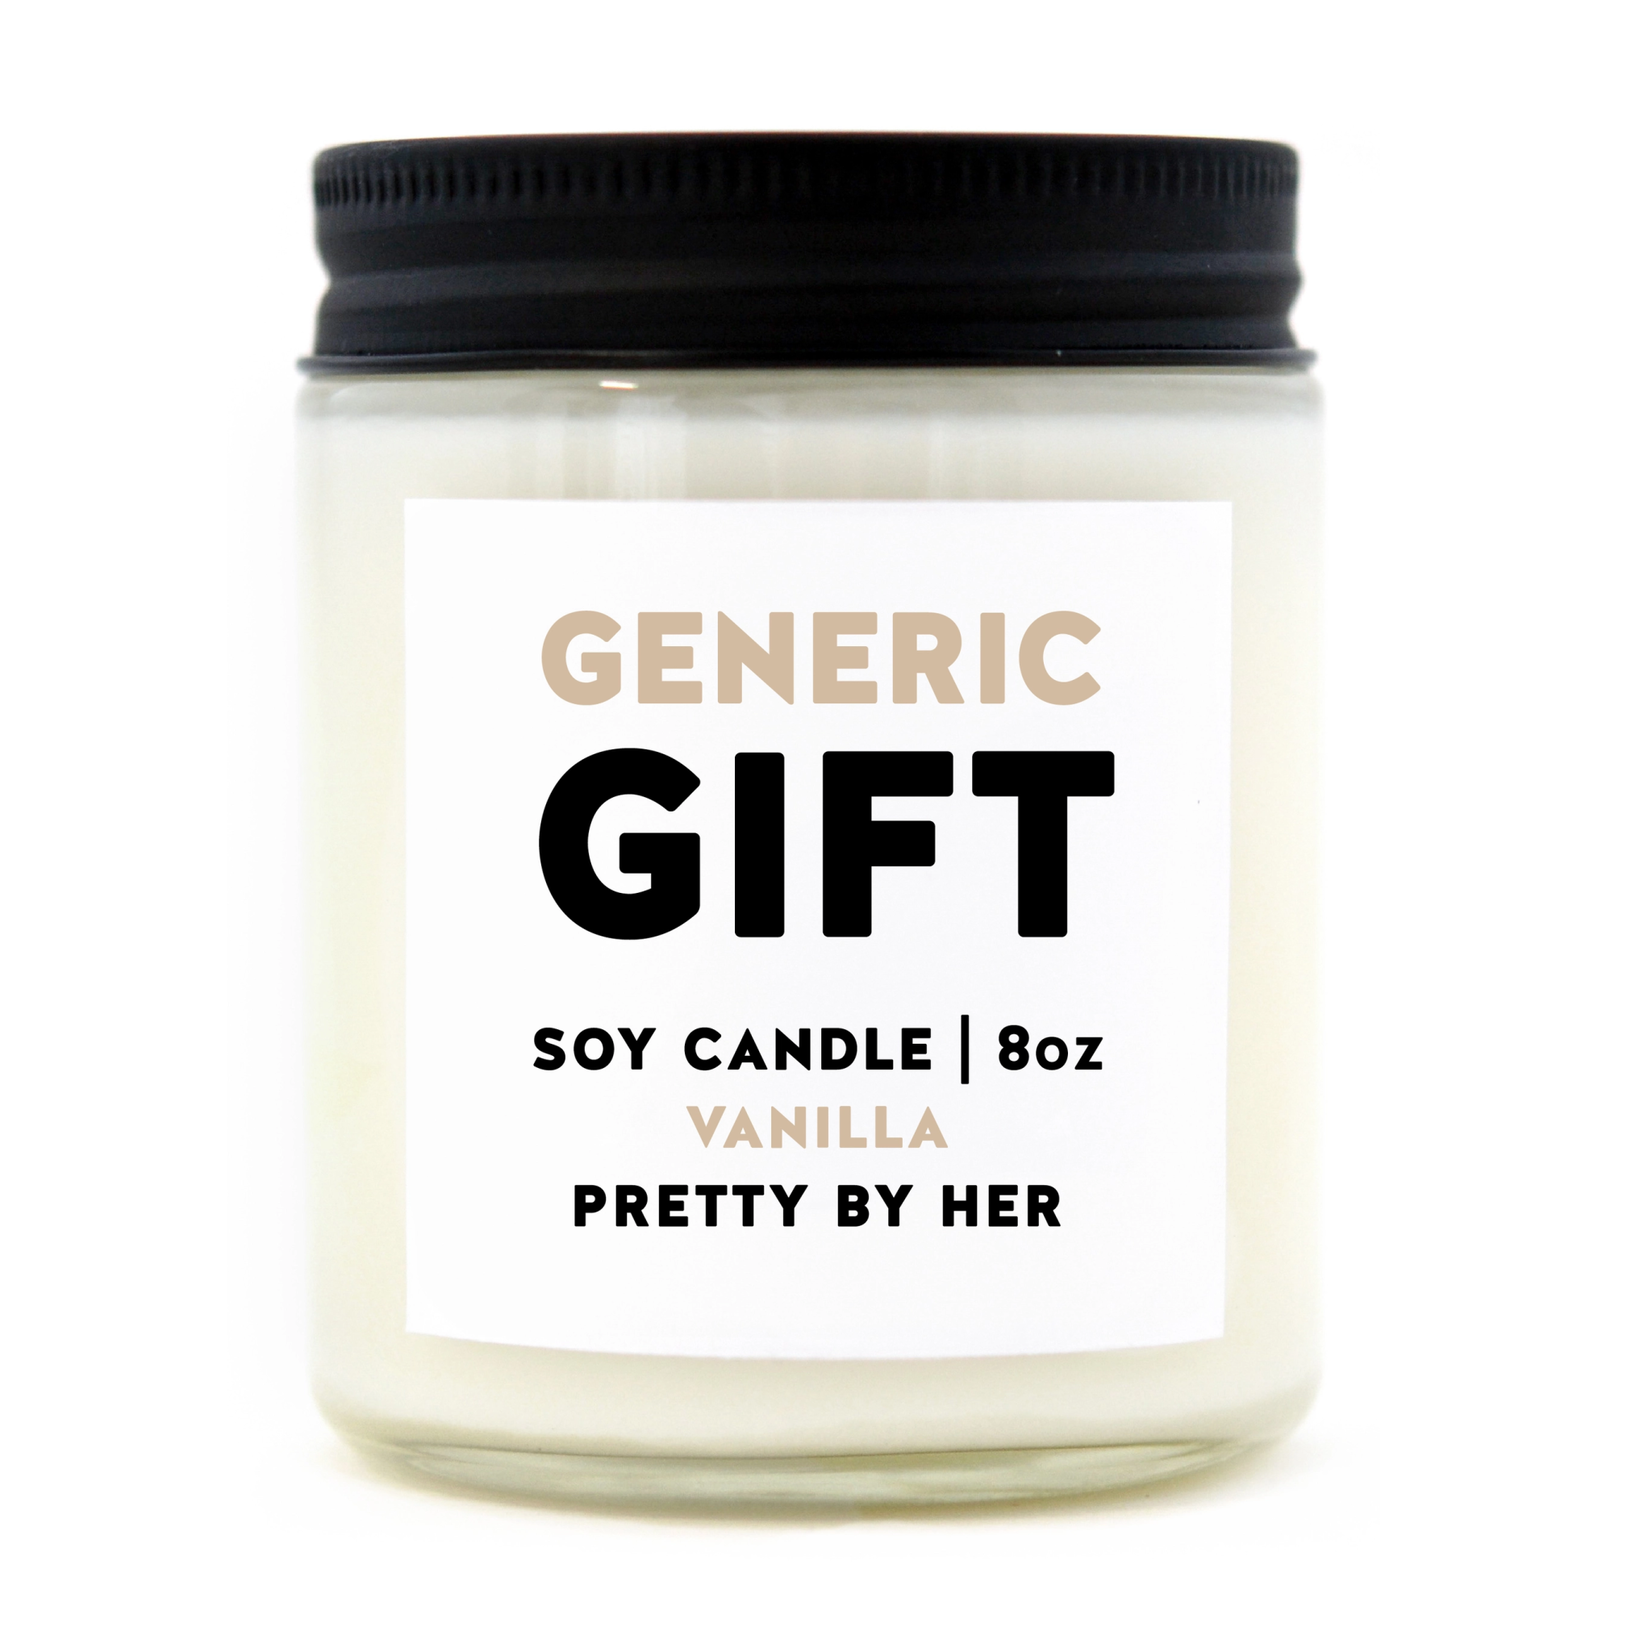 Soy Candle - Generic Gift